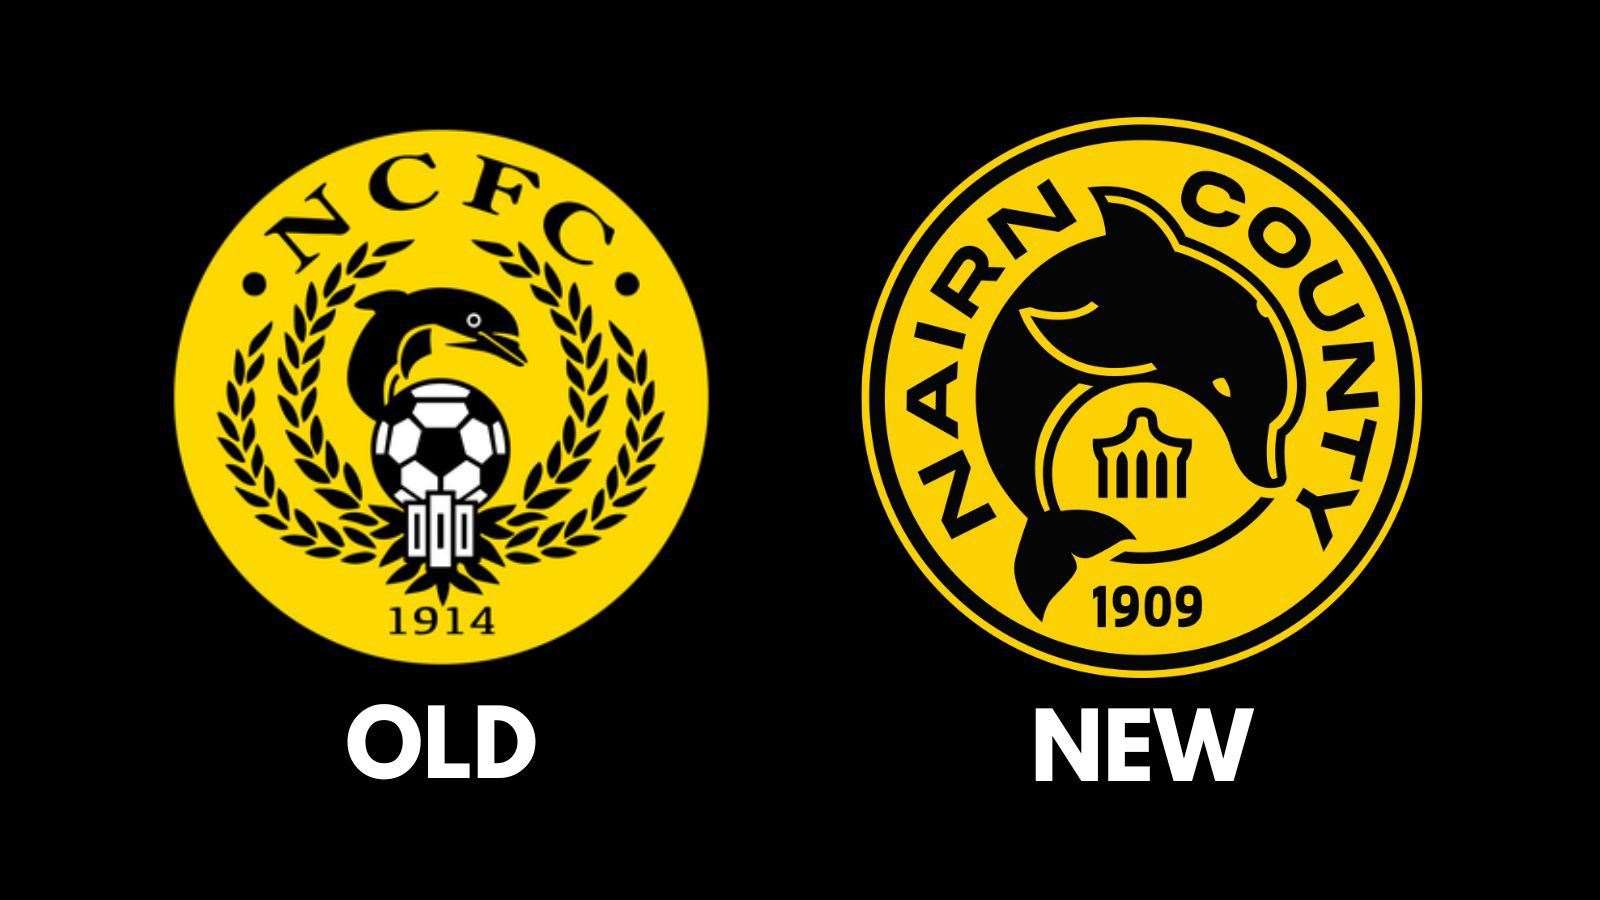 The old and new club badge of Nairn County.